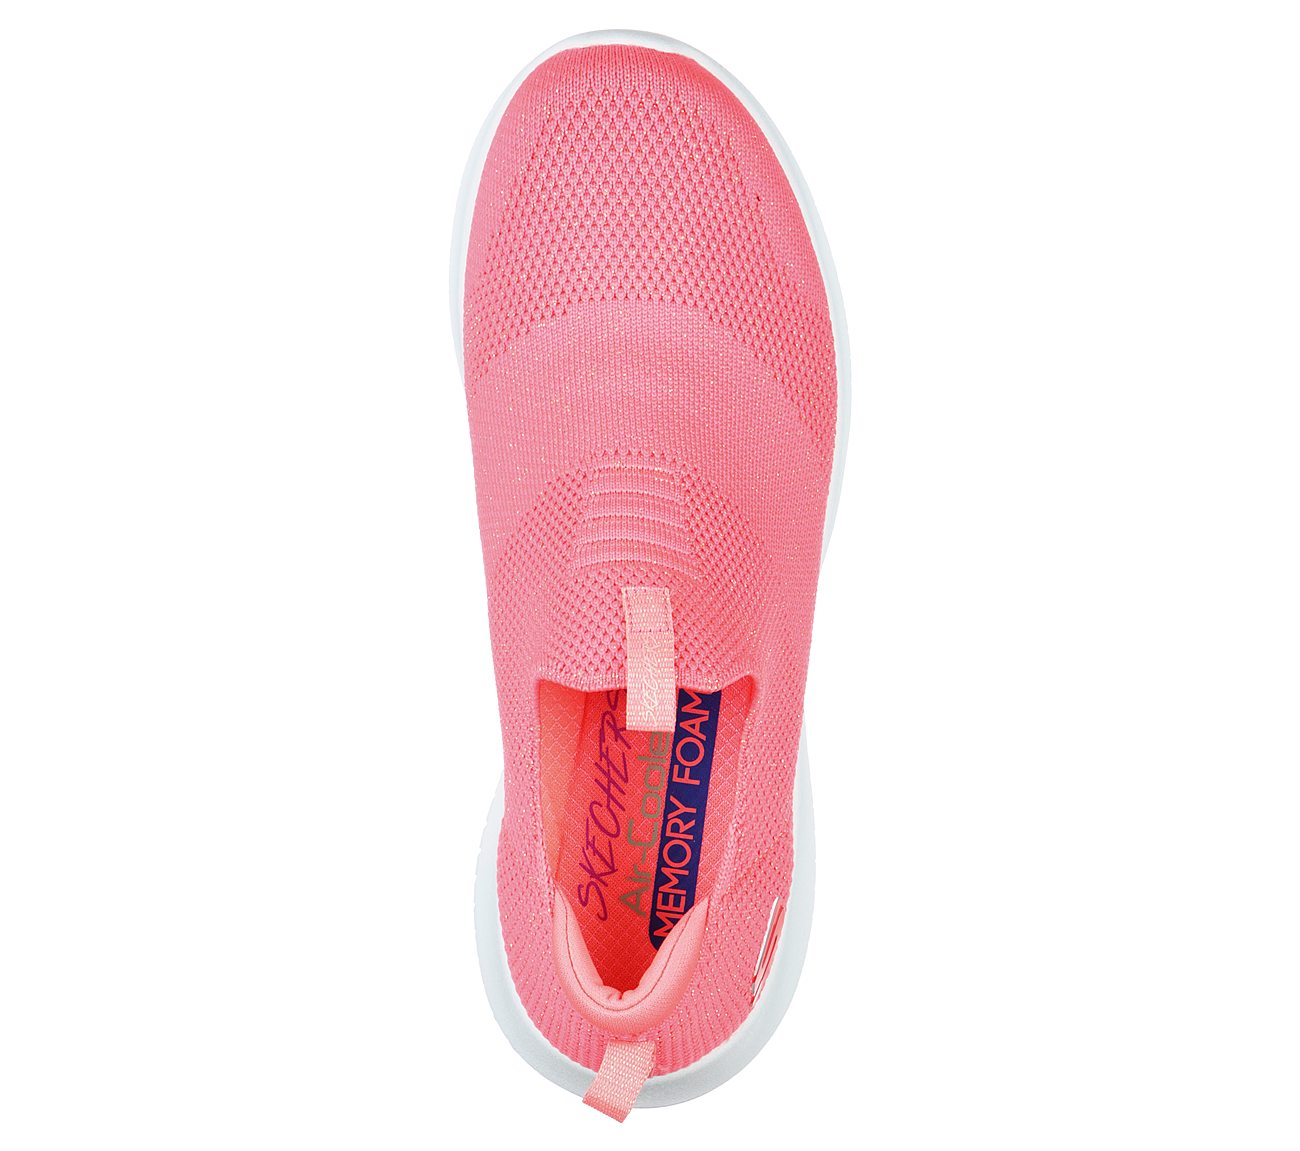 ULTRA FLEX - CANDY CRAVINGS, CCORAL Footwear Top View